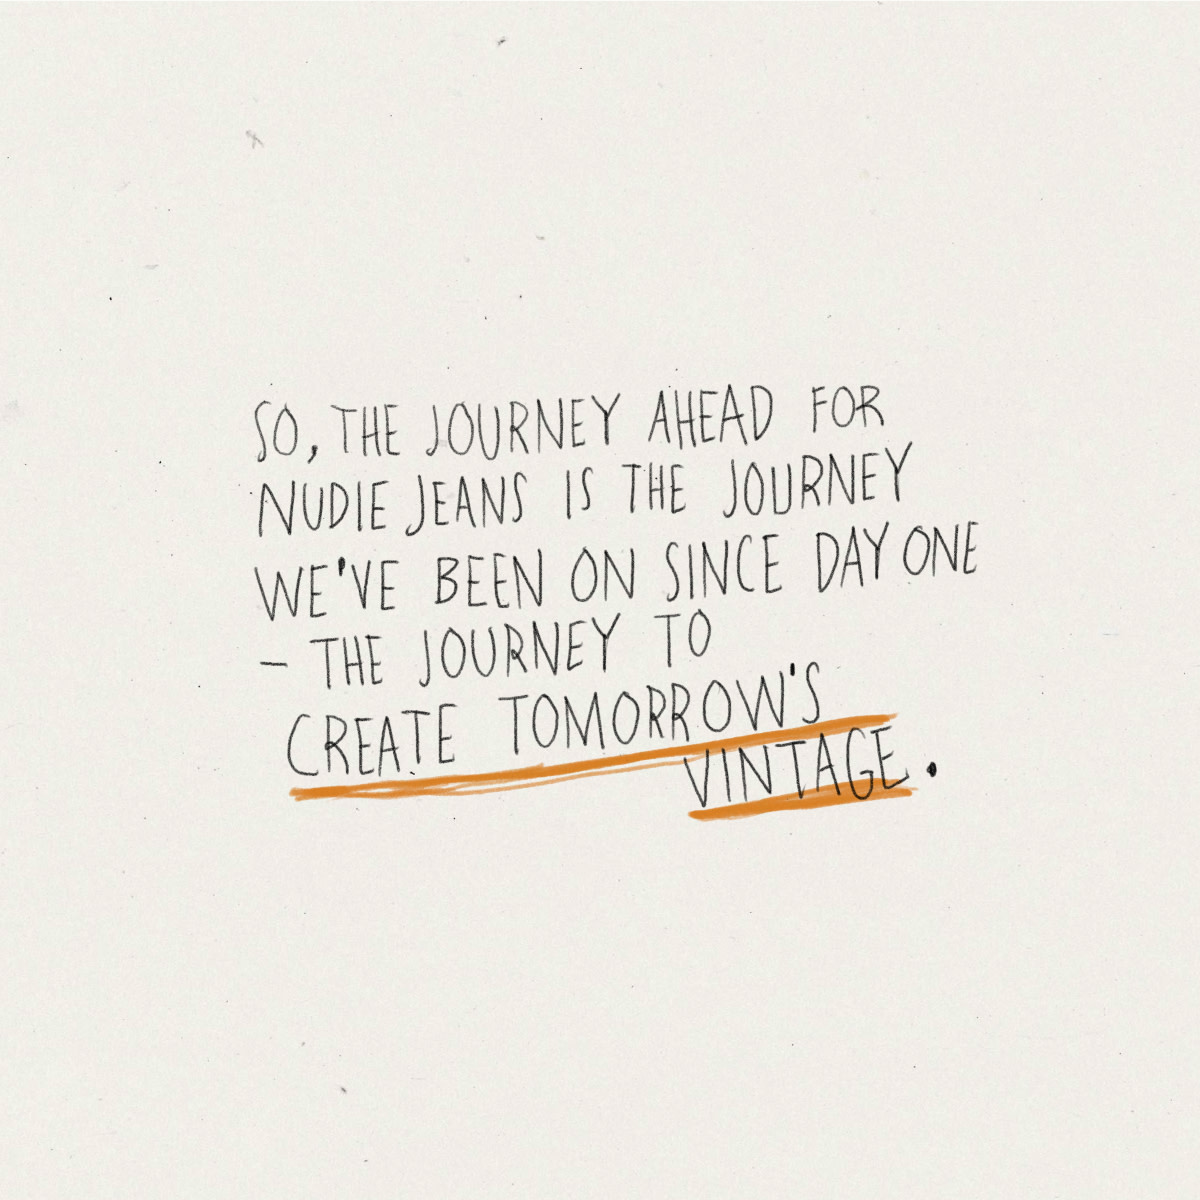 So, the journey ahead for Nudie Jeans is the journey we've been on since day one - the journey to create tomorrow's vintage.